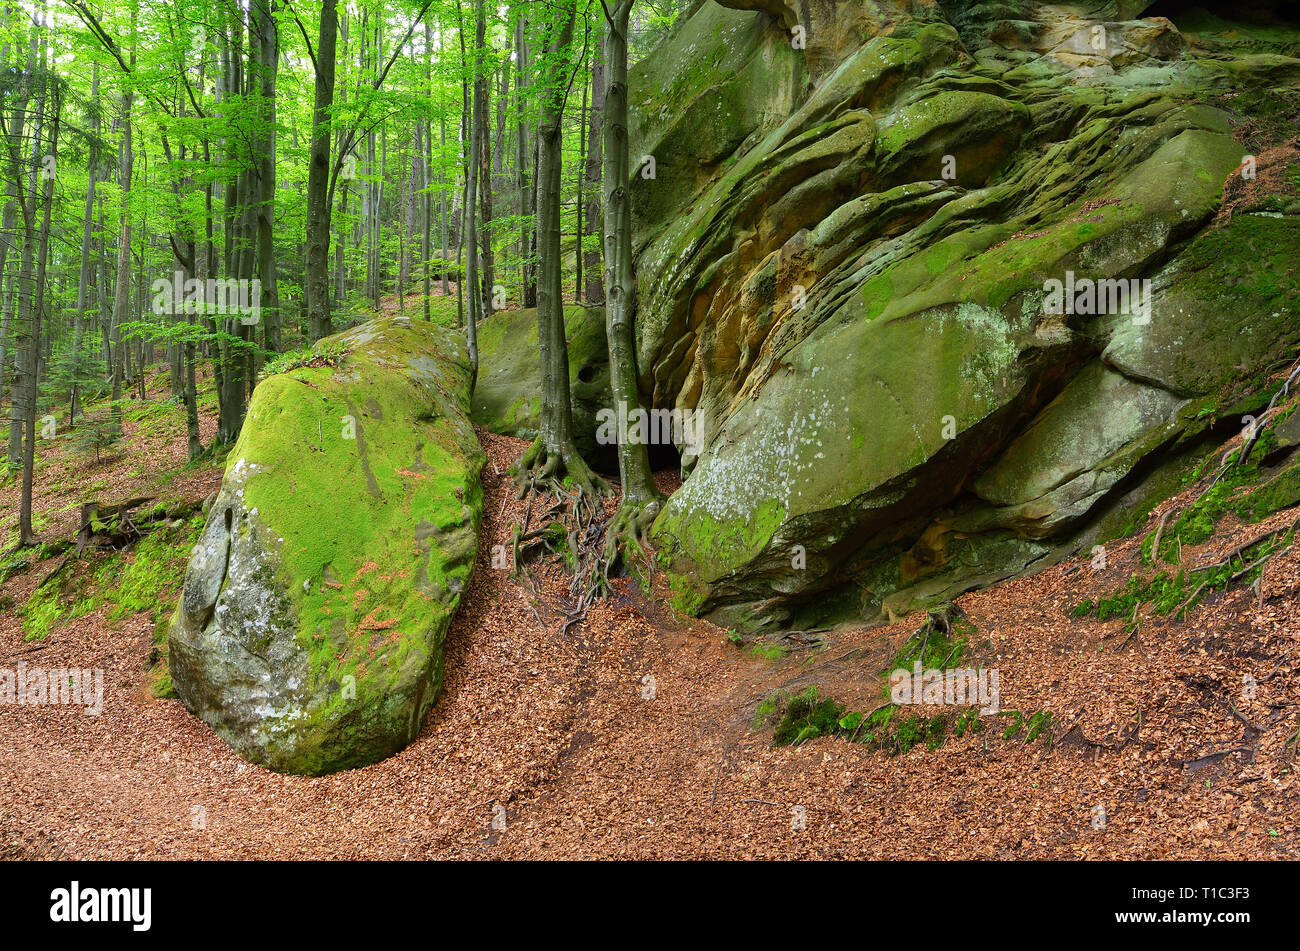 Summer landscape with fairy forest. Green moss on stones and trees with beautiful roots. Carpathians, Ukraine, Europe Stock Photo